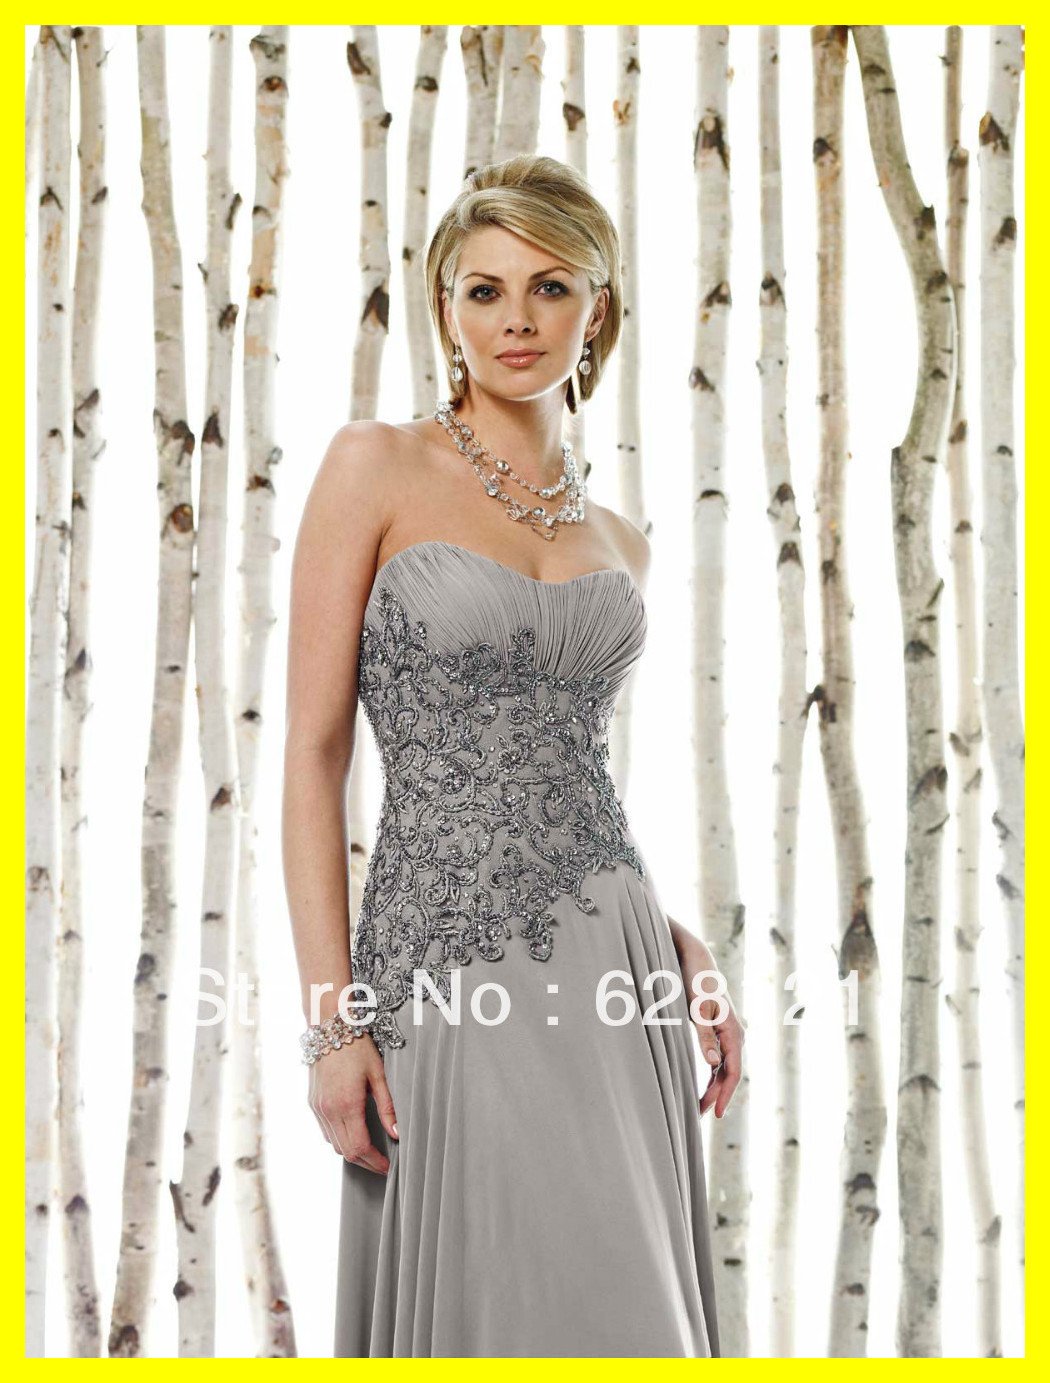 petite mother of bride outfits uk